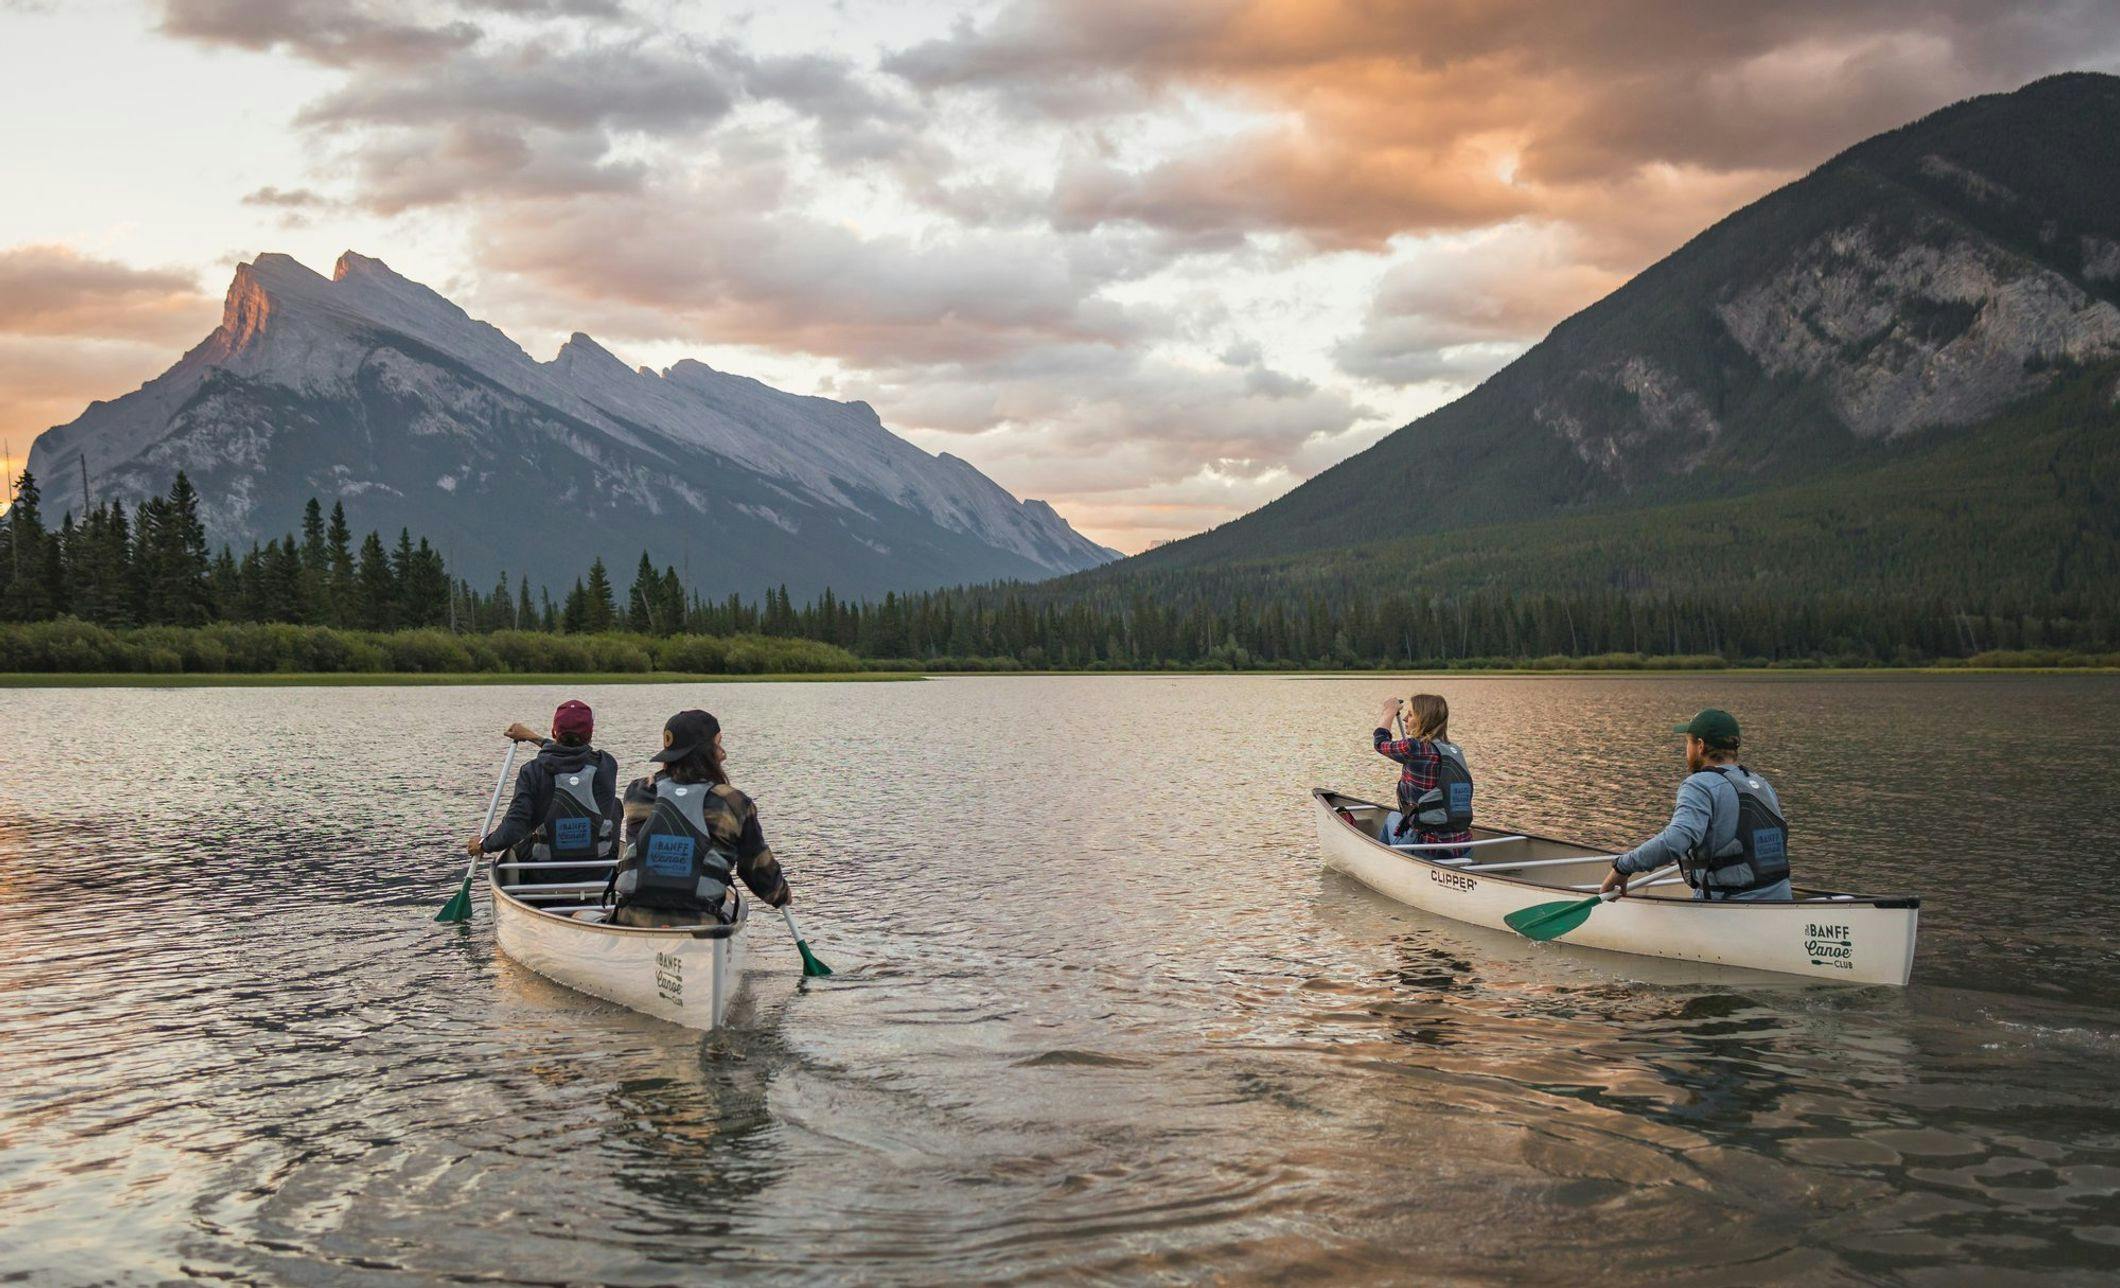 4 friends paddle in 2 canoes in an open lake surrounded by mountains during sunrise